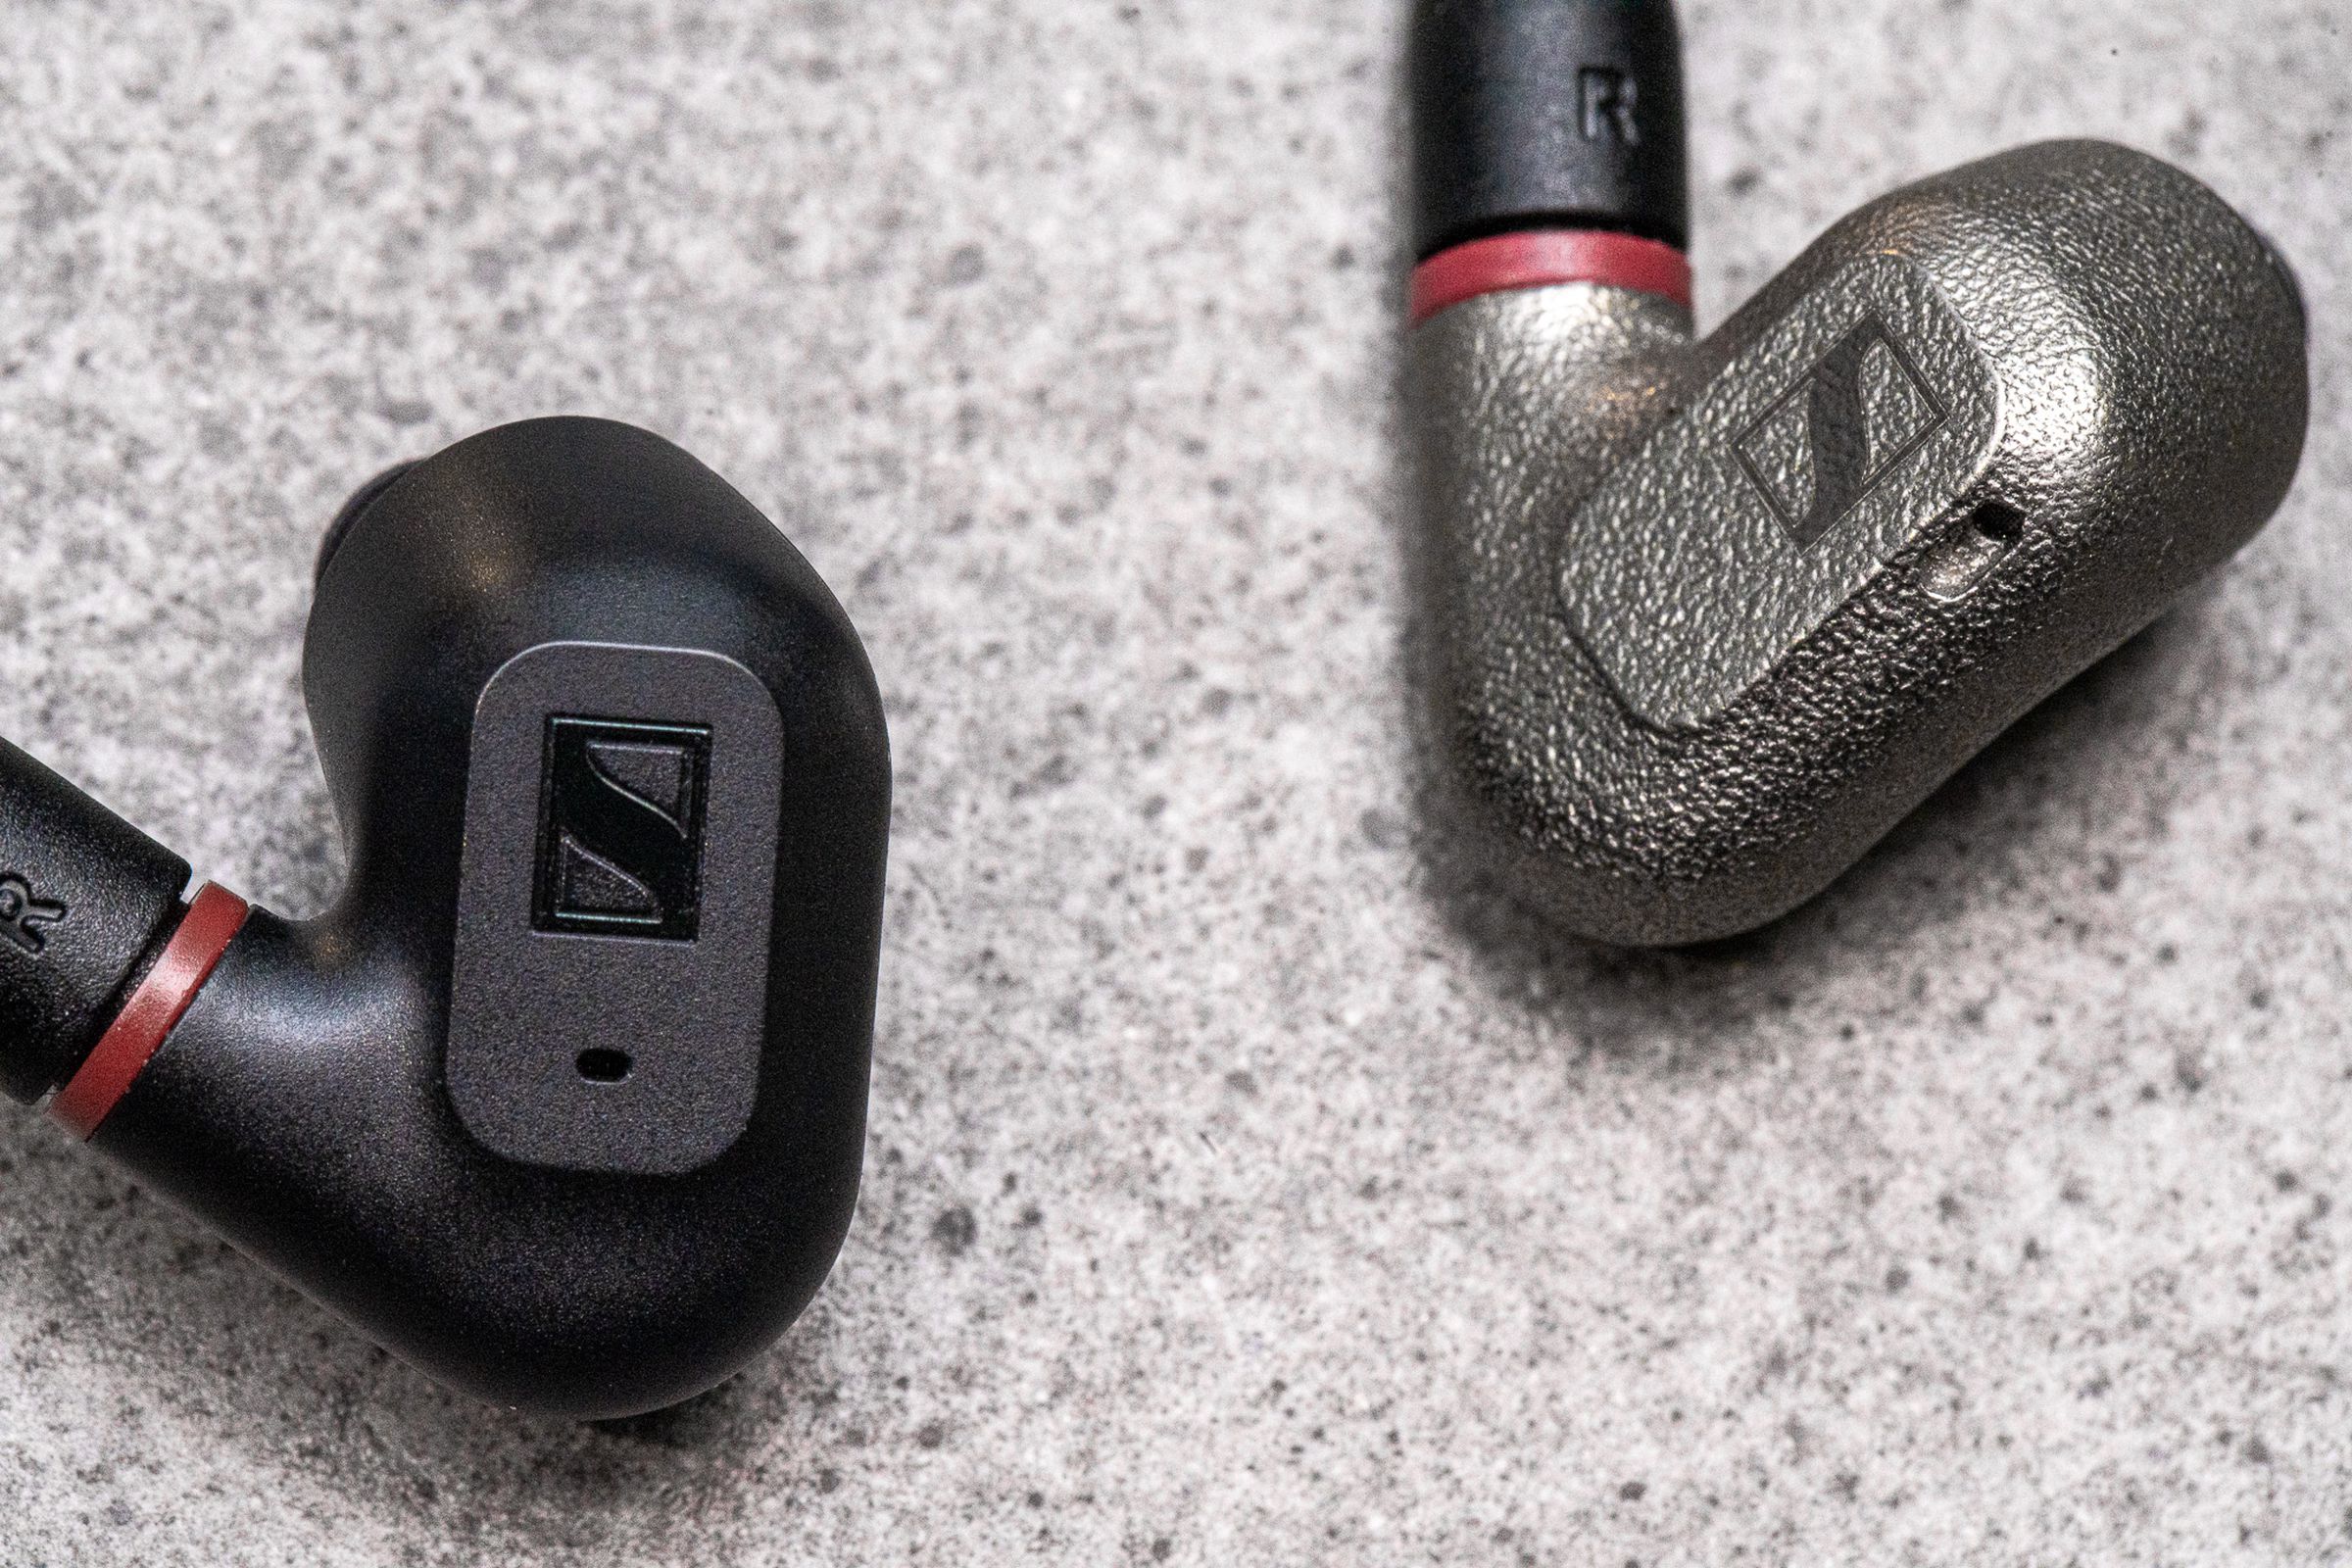 A photo comparing the case material of Sennheiser’s IE 200 and IE 600 earbuds.